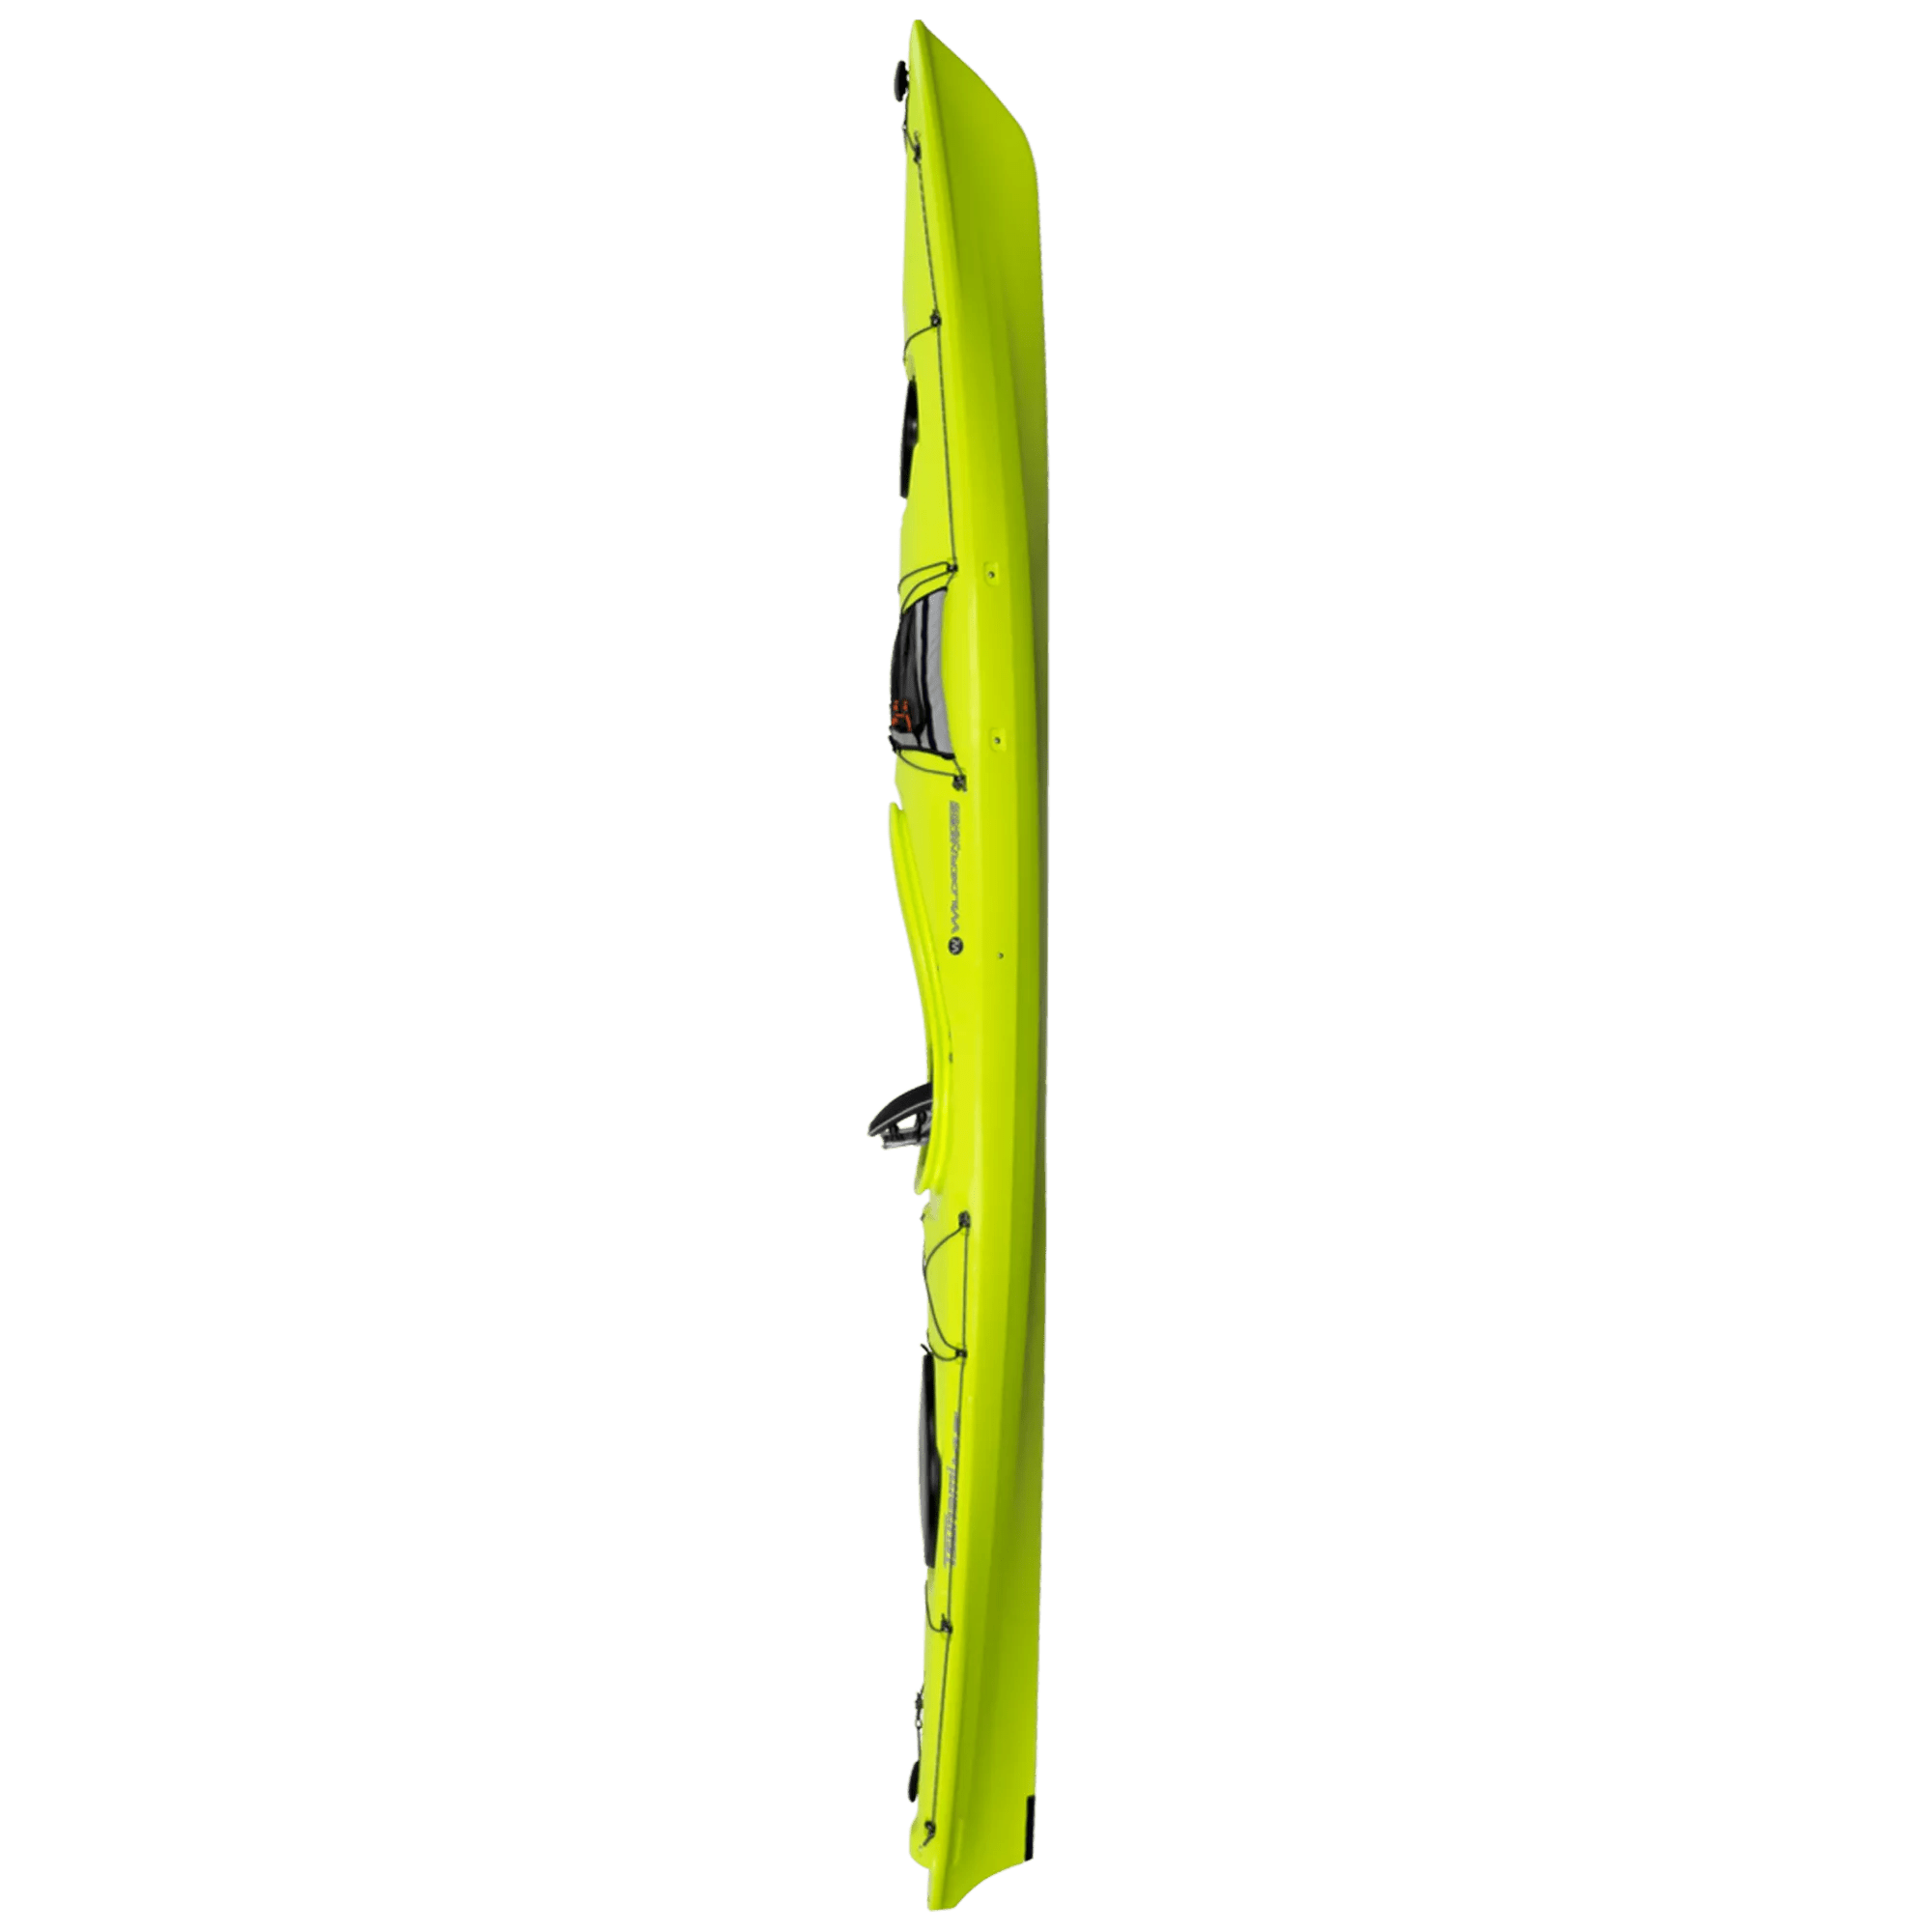 WILDERNESS SYSTEMS - Tsunami 145 Day Touring Kayak with Rudder - Discontinued color/model - Yellow - 9720468180 - SIDE